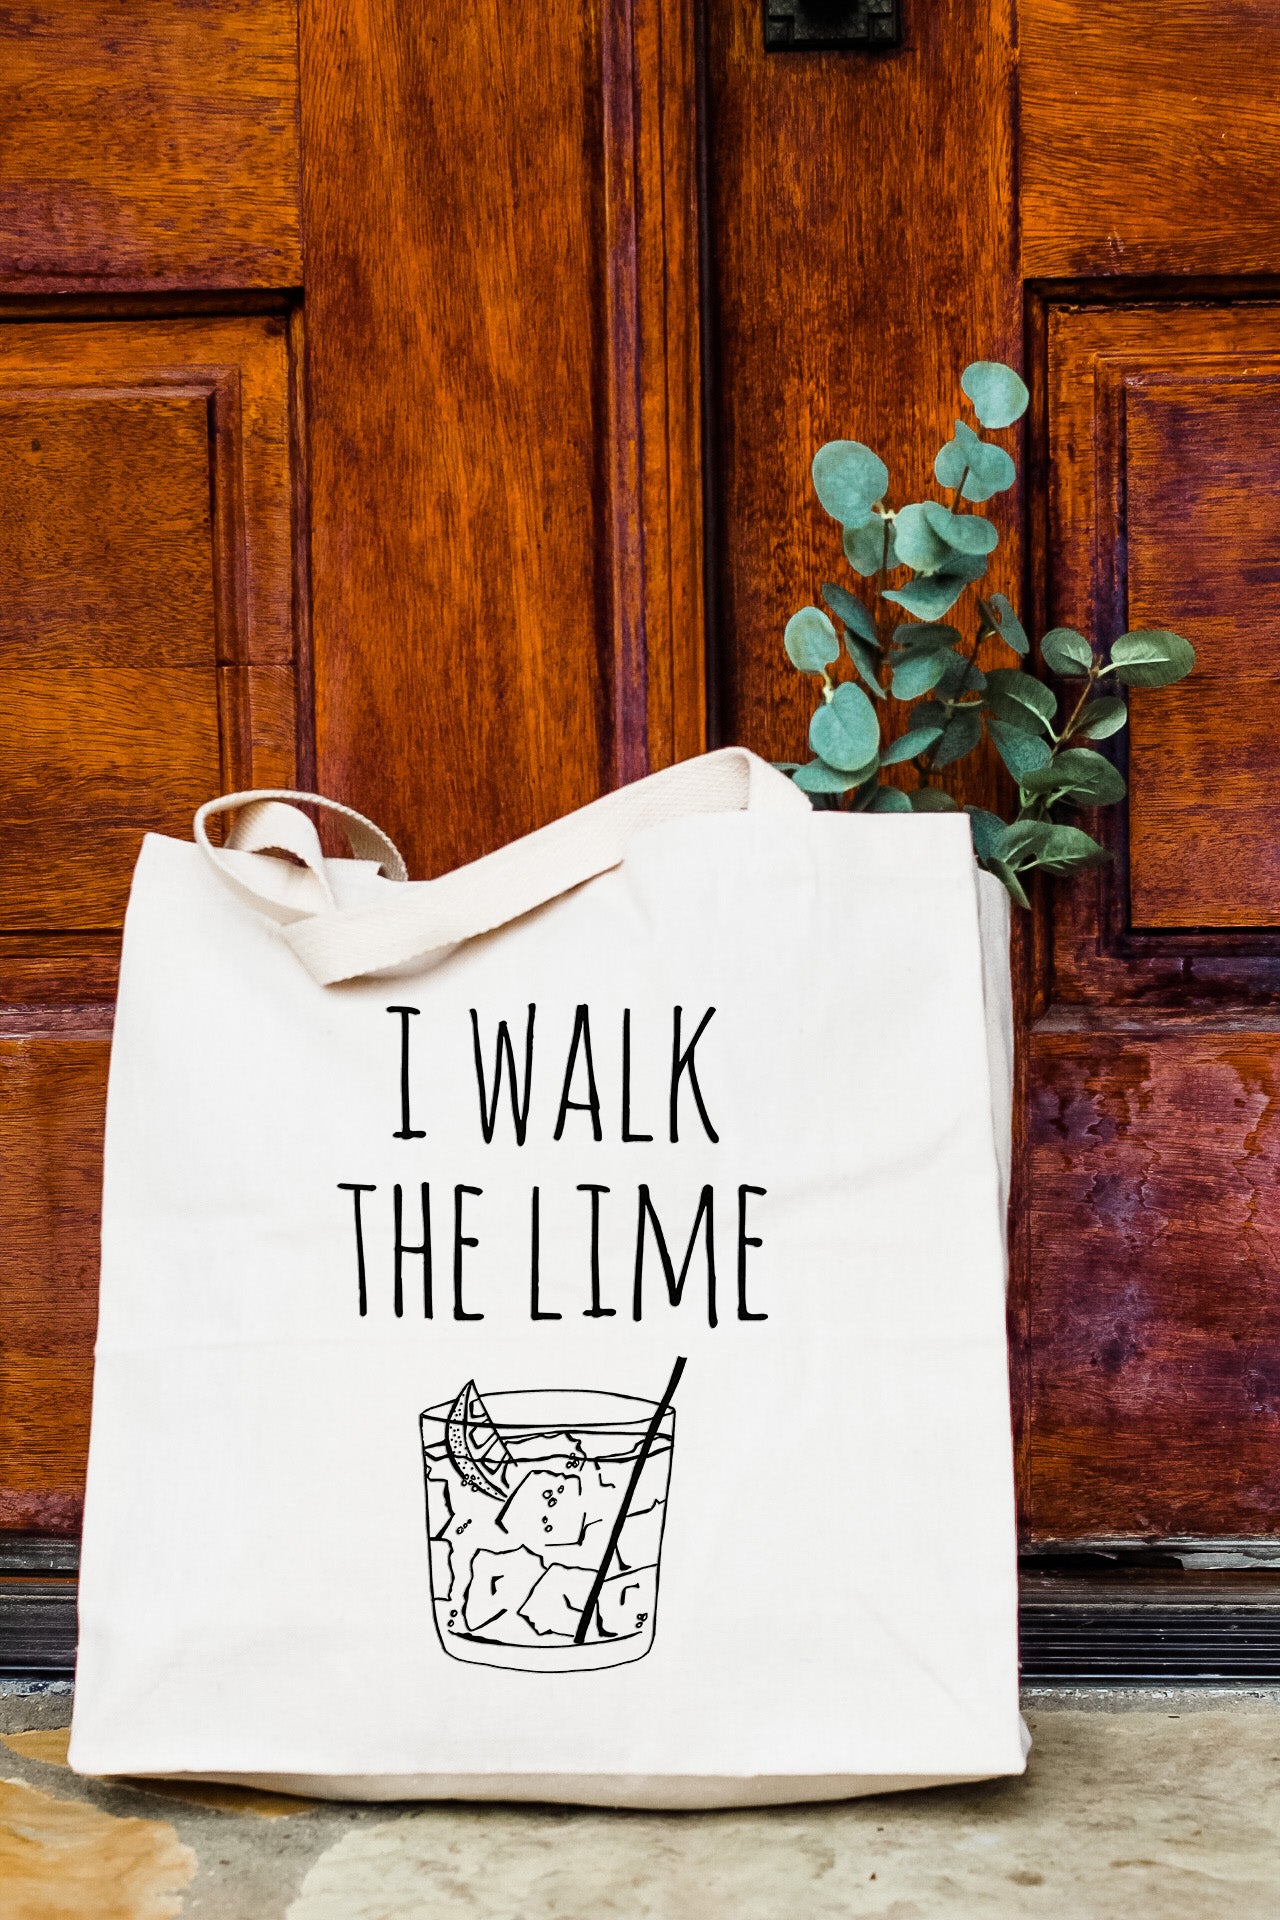 I Walk The Lime - Tote Bag - MoonlightMakers